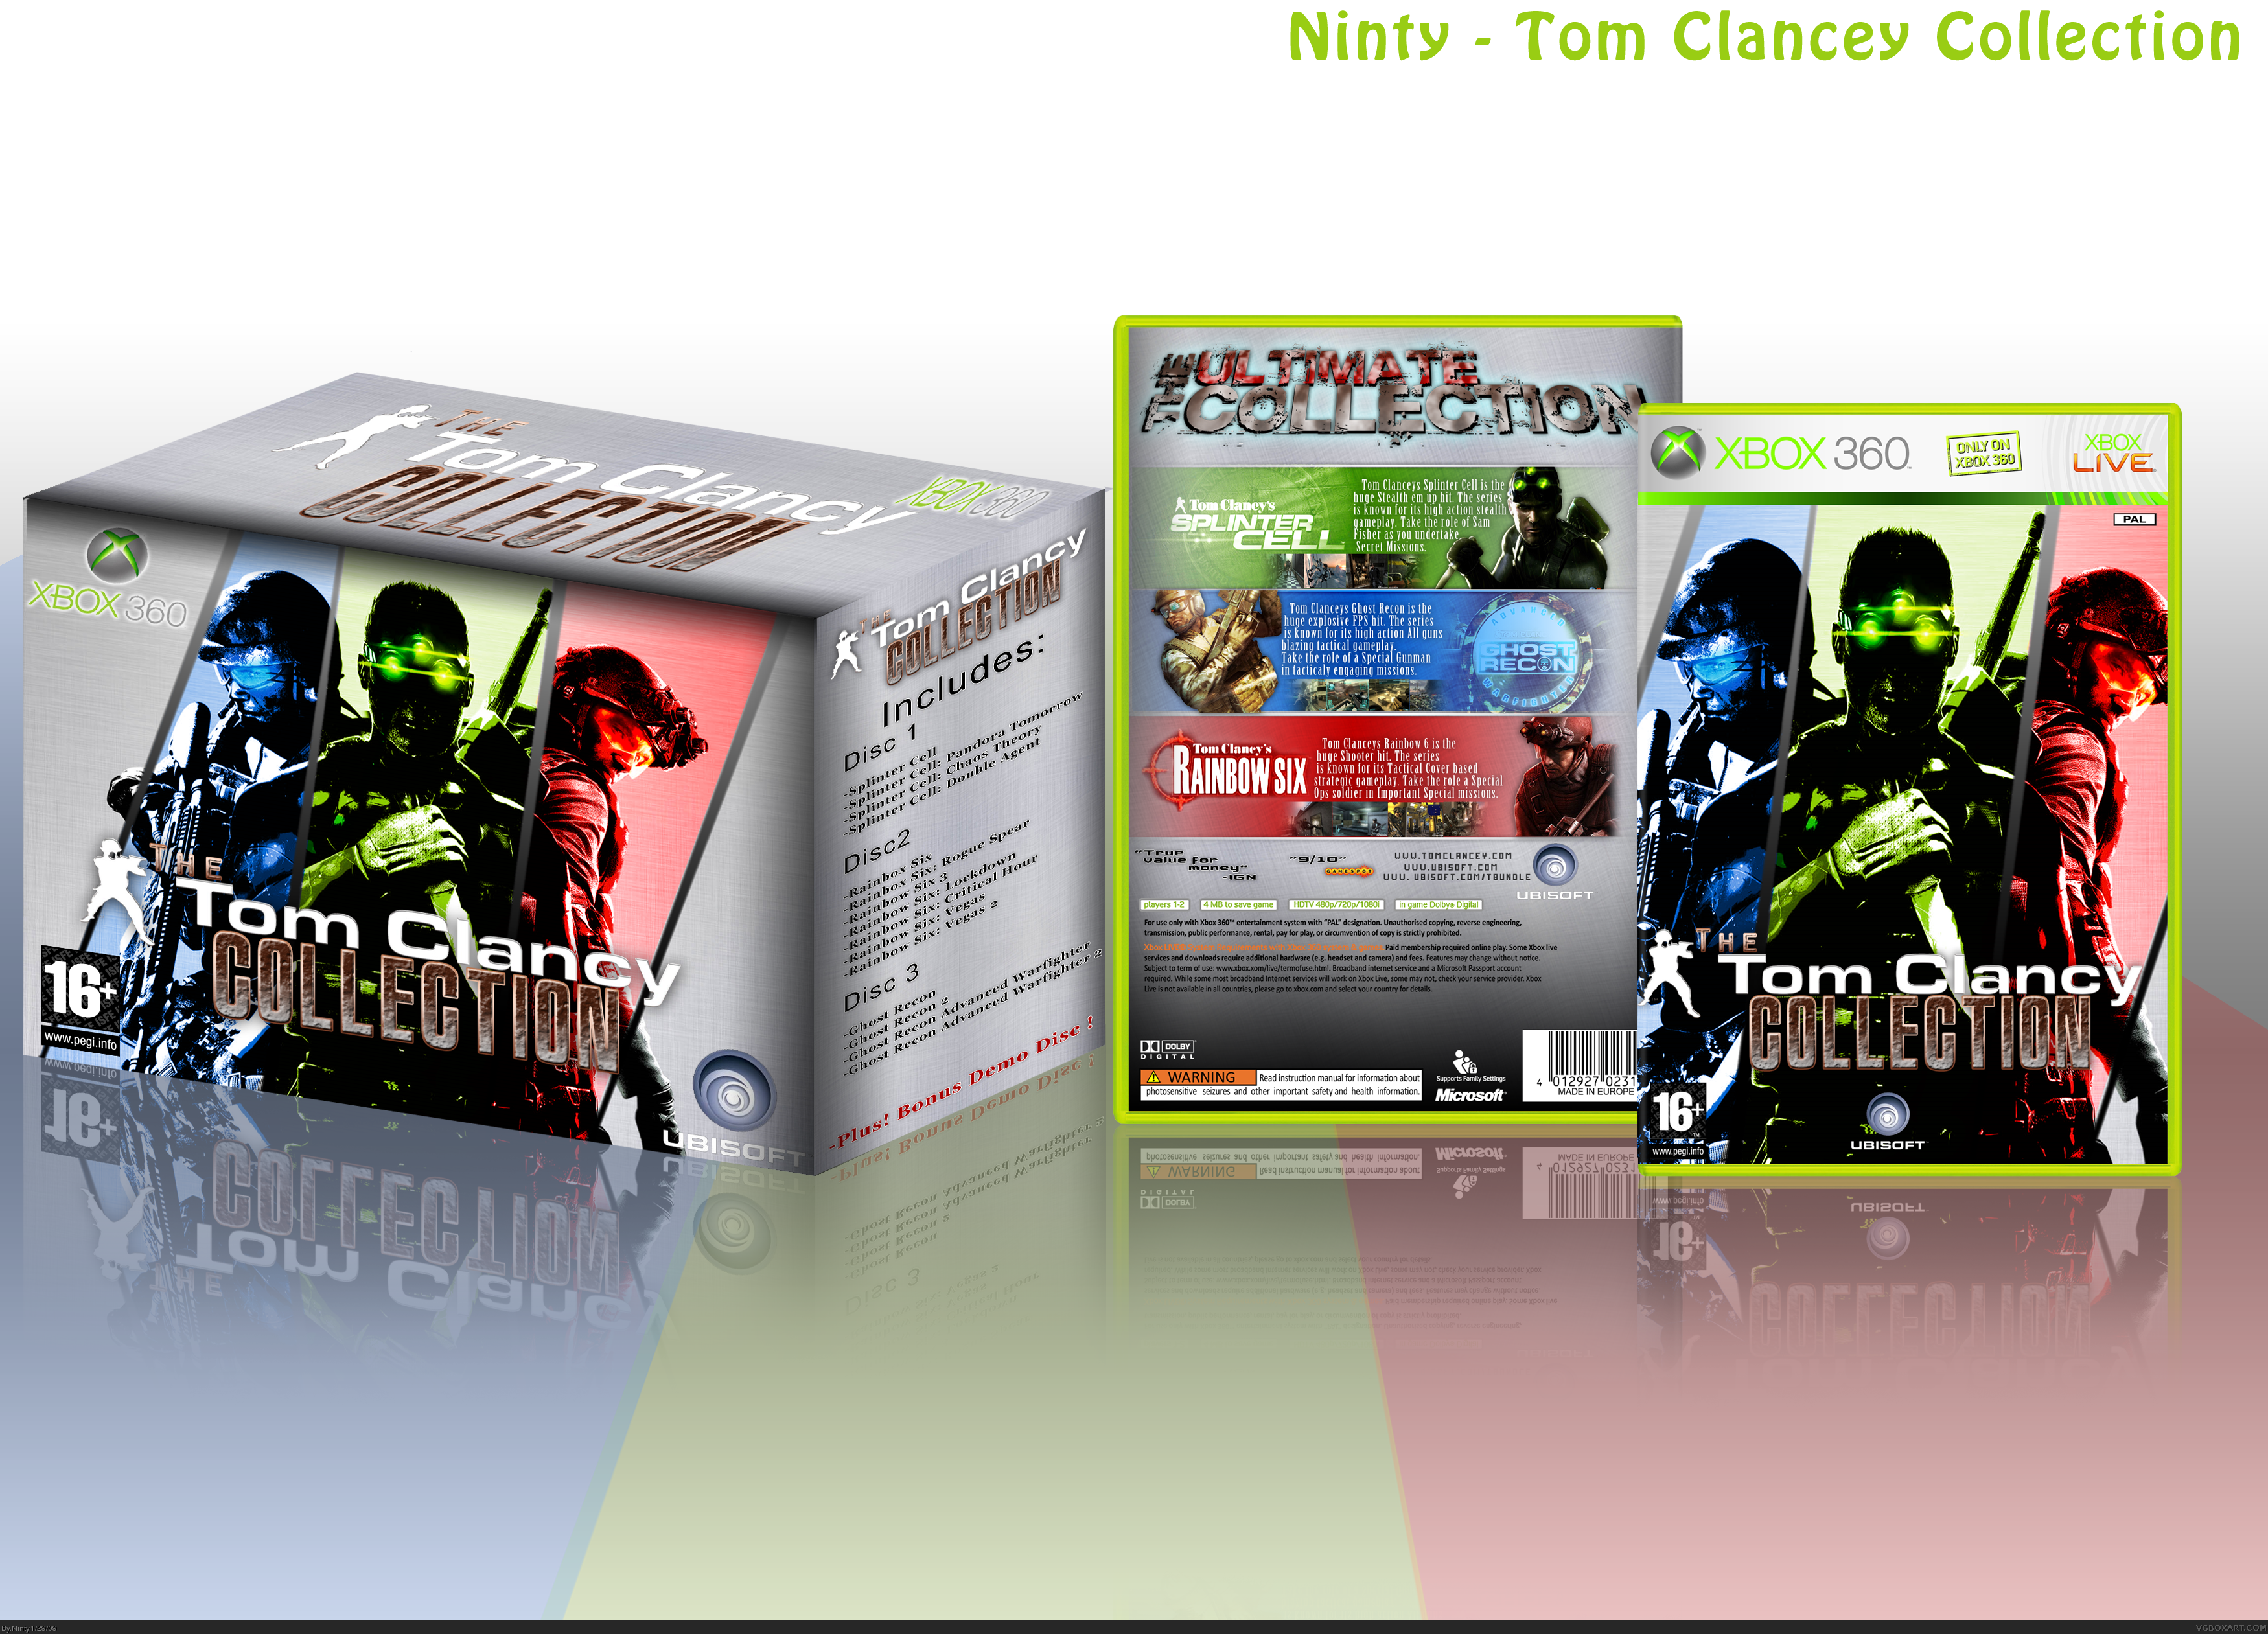 The Tom Clancey Collection box cover